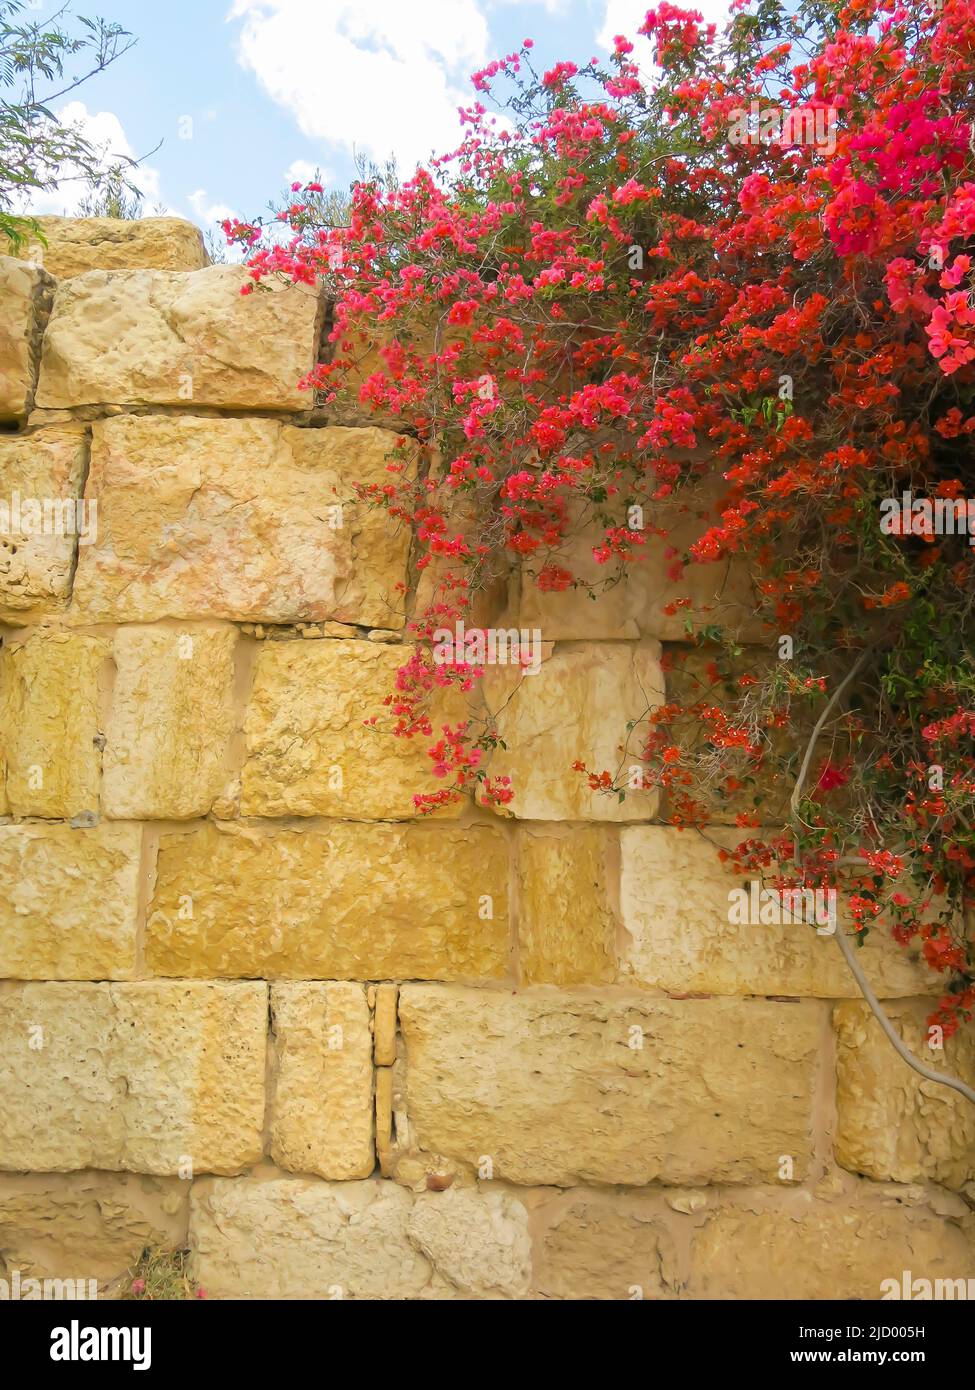 Bougainvillea Growing Against Ancient Wall at the Ruins of Sbeitia, Tunisia Stock Photo